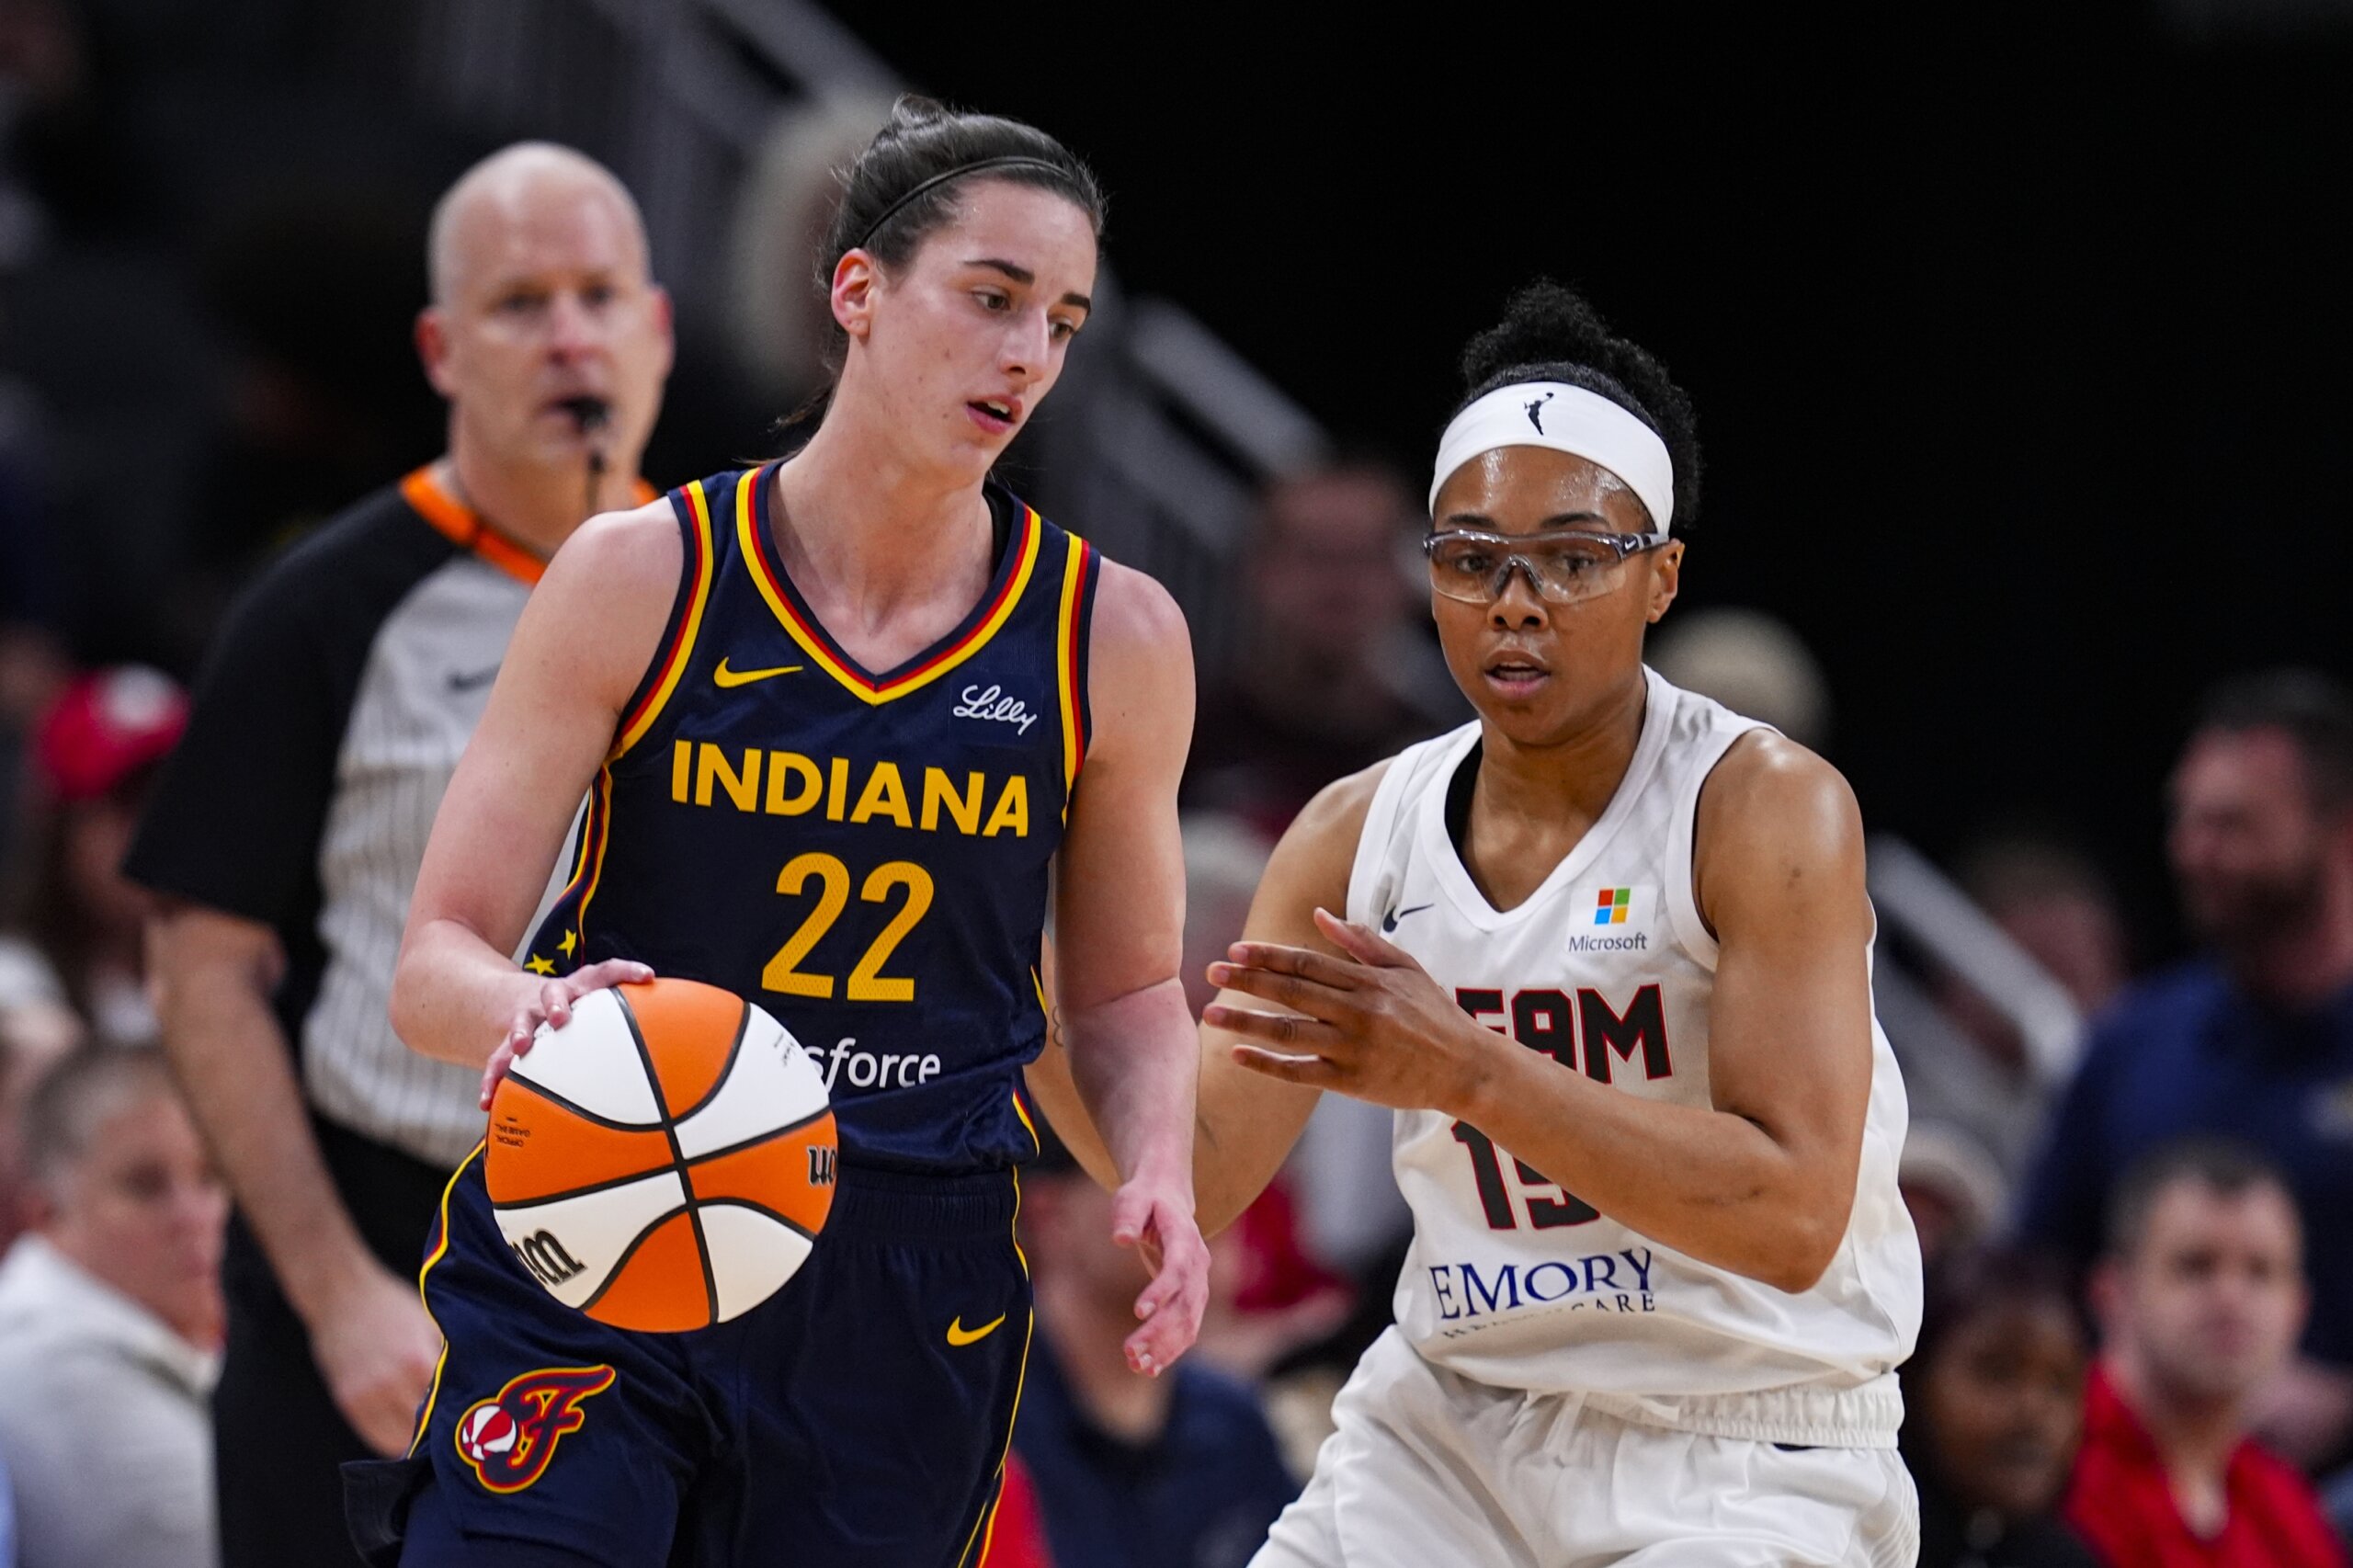 Caitlin Clark struggles early in WNBA debut before scoring 20 points in Fever loss to Connecticut